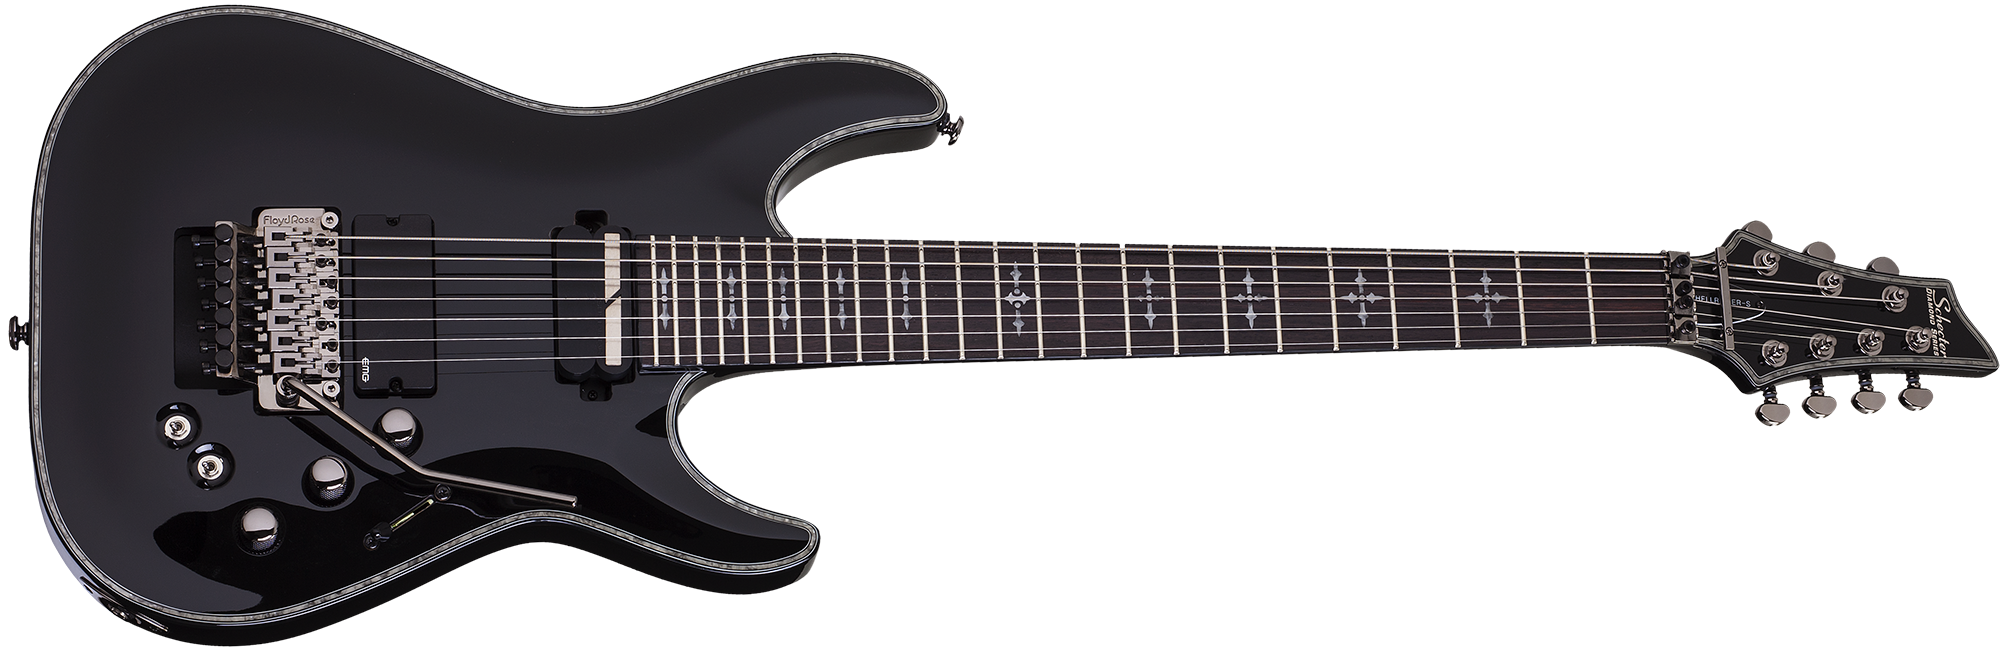 Schecter C 7 FR Hellraiser S BLK Gloss Black 7 String Guitar with FR and Sustainiac and EMG 81 1830-SHC